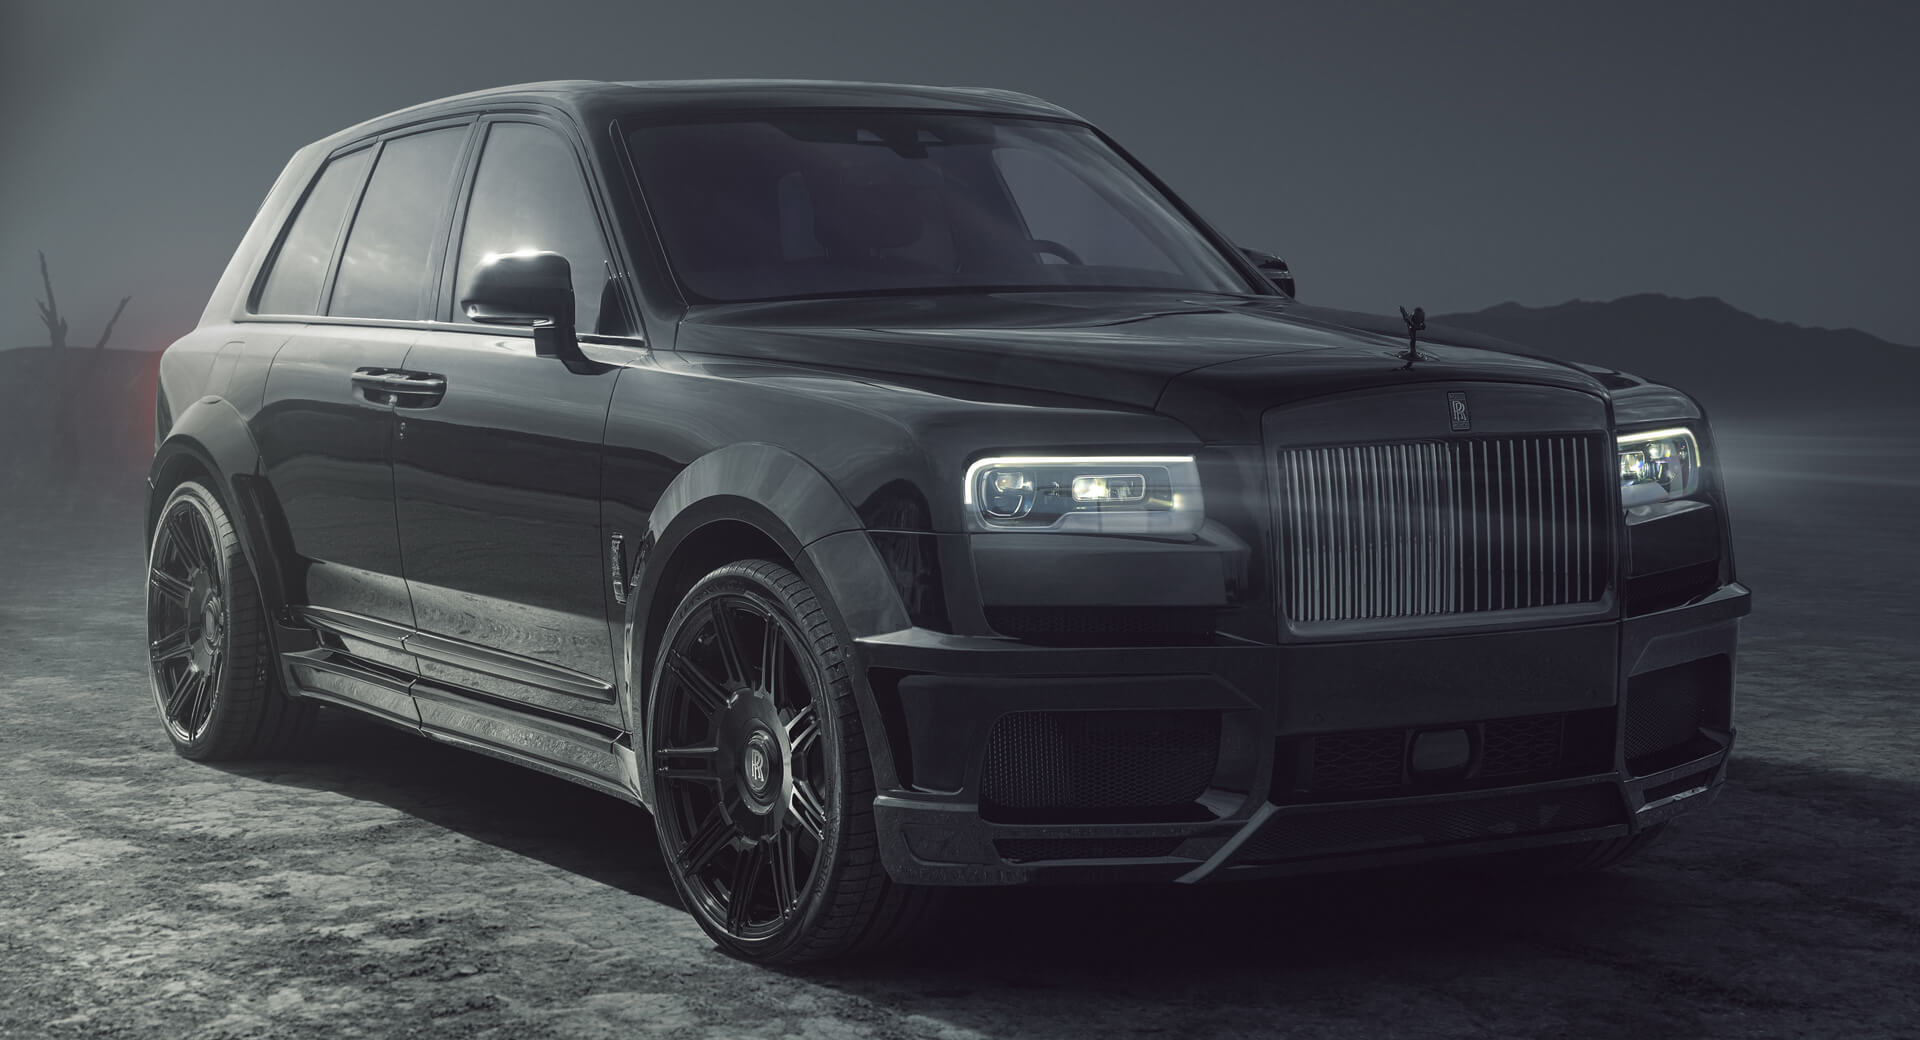 RollsRoyce Cullinan Black Badge Gets A Sinister Widebody Makeover